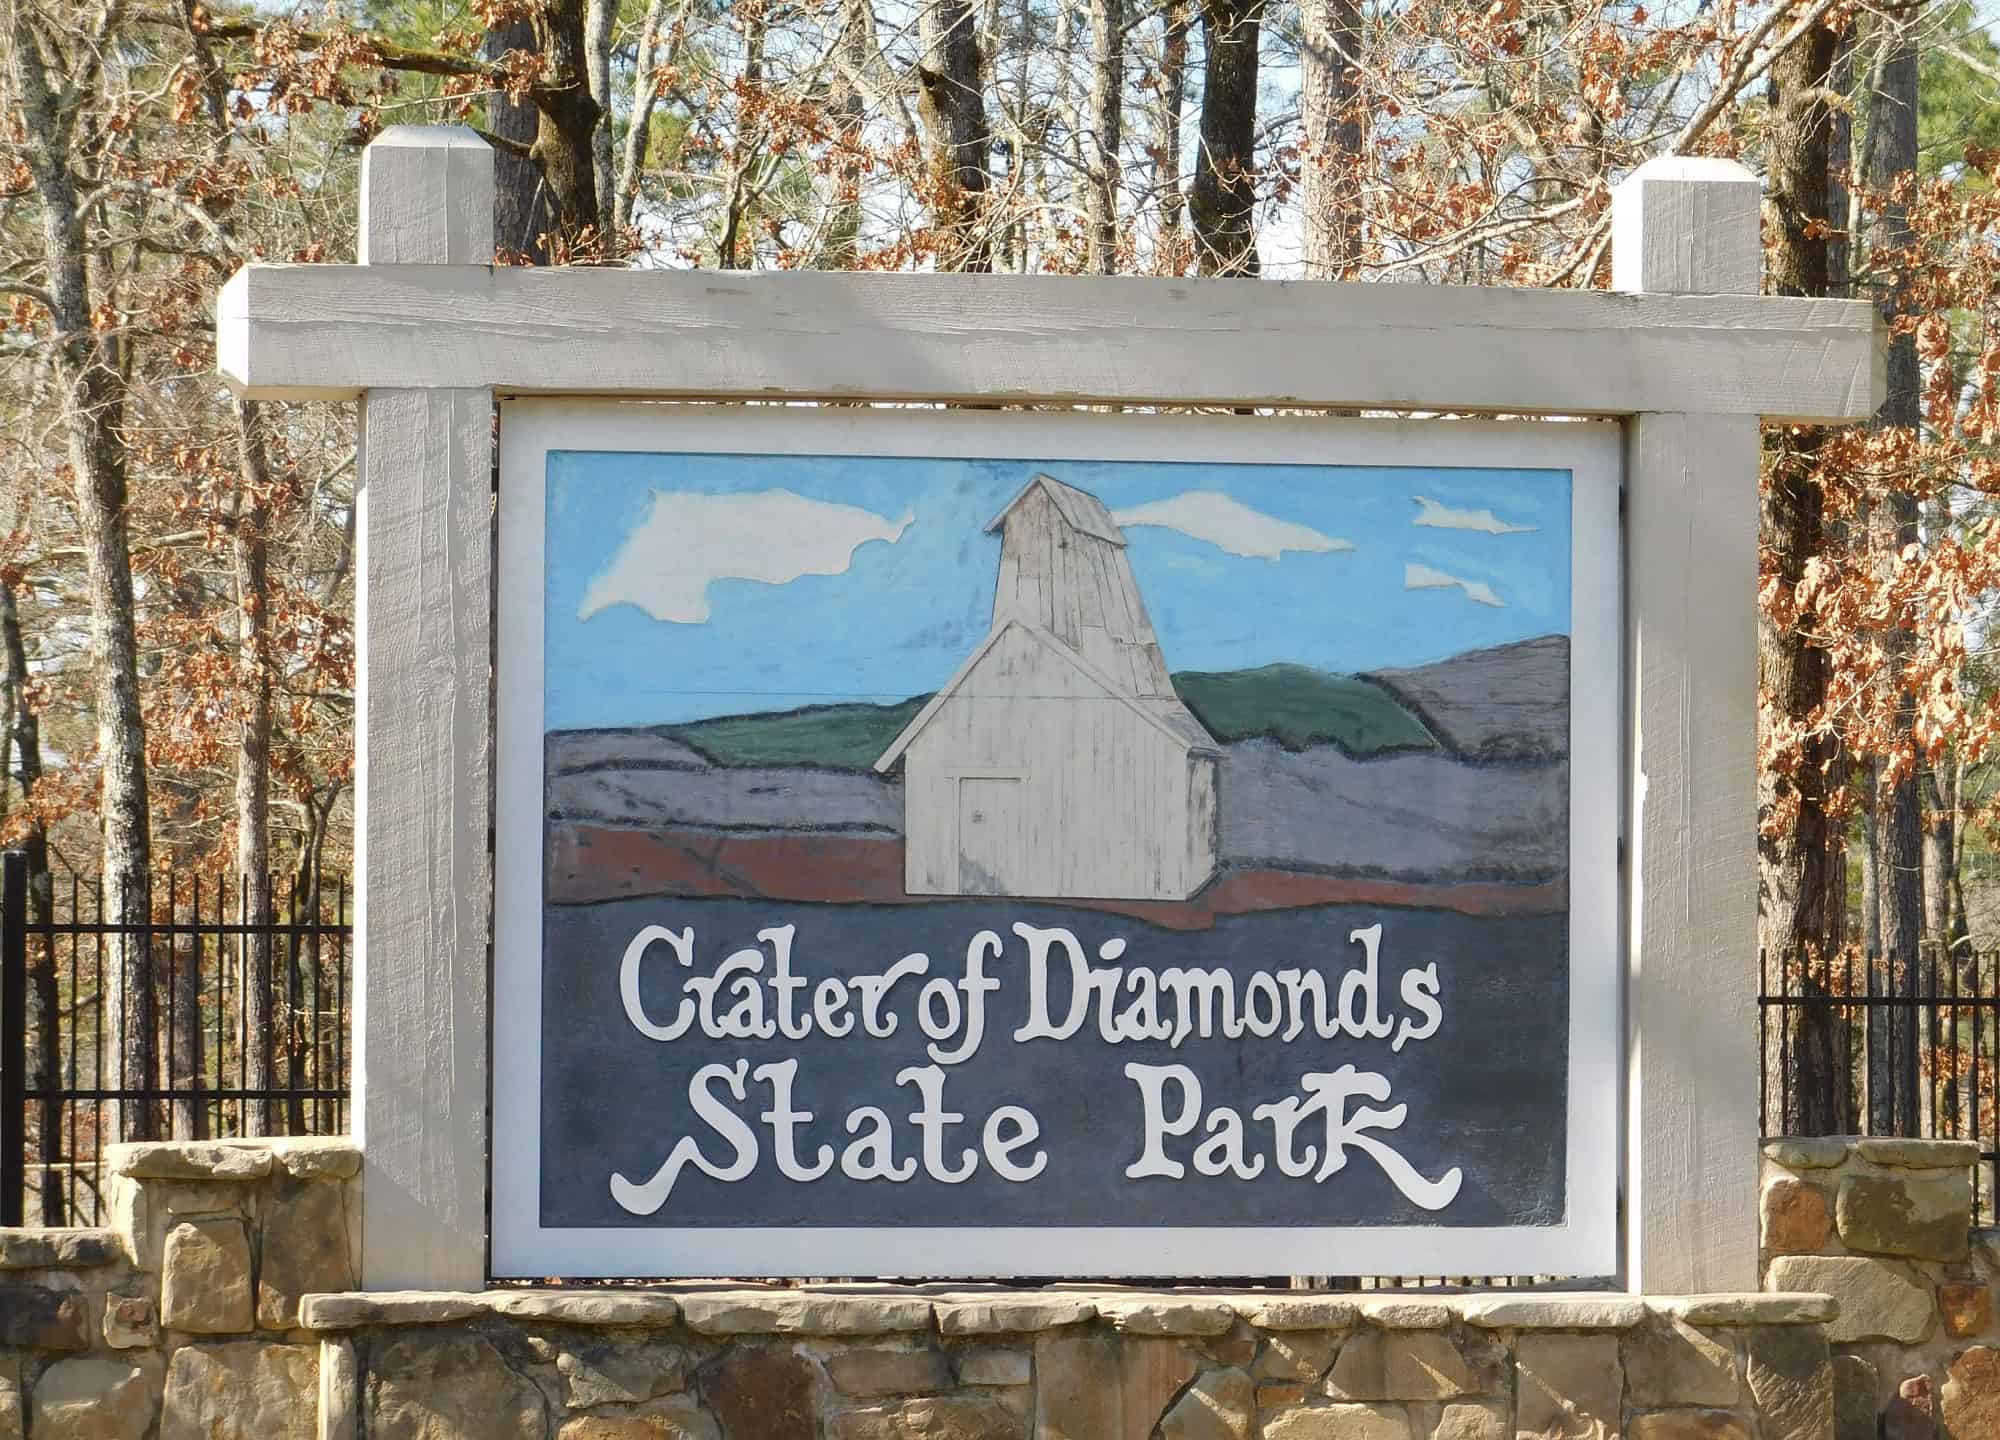 crater of diamonds state park sign